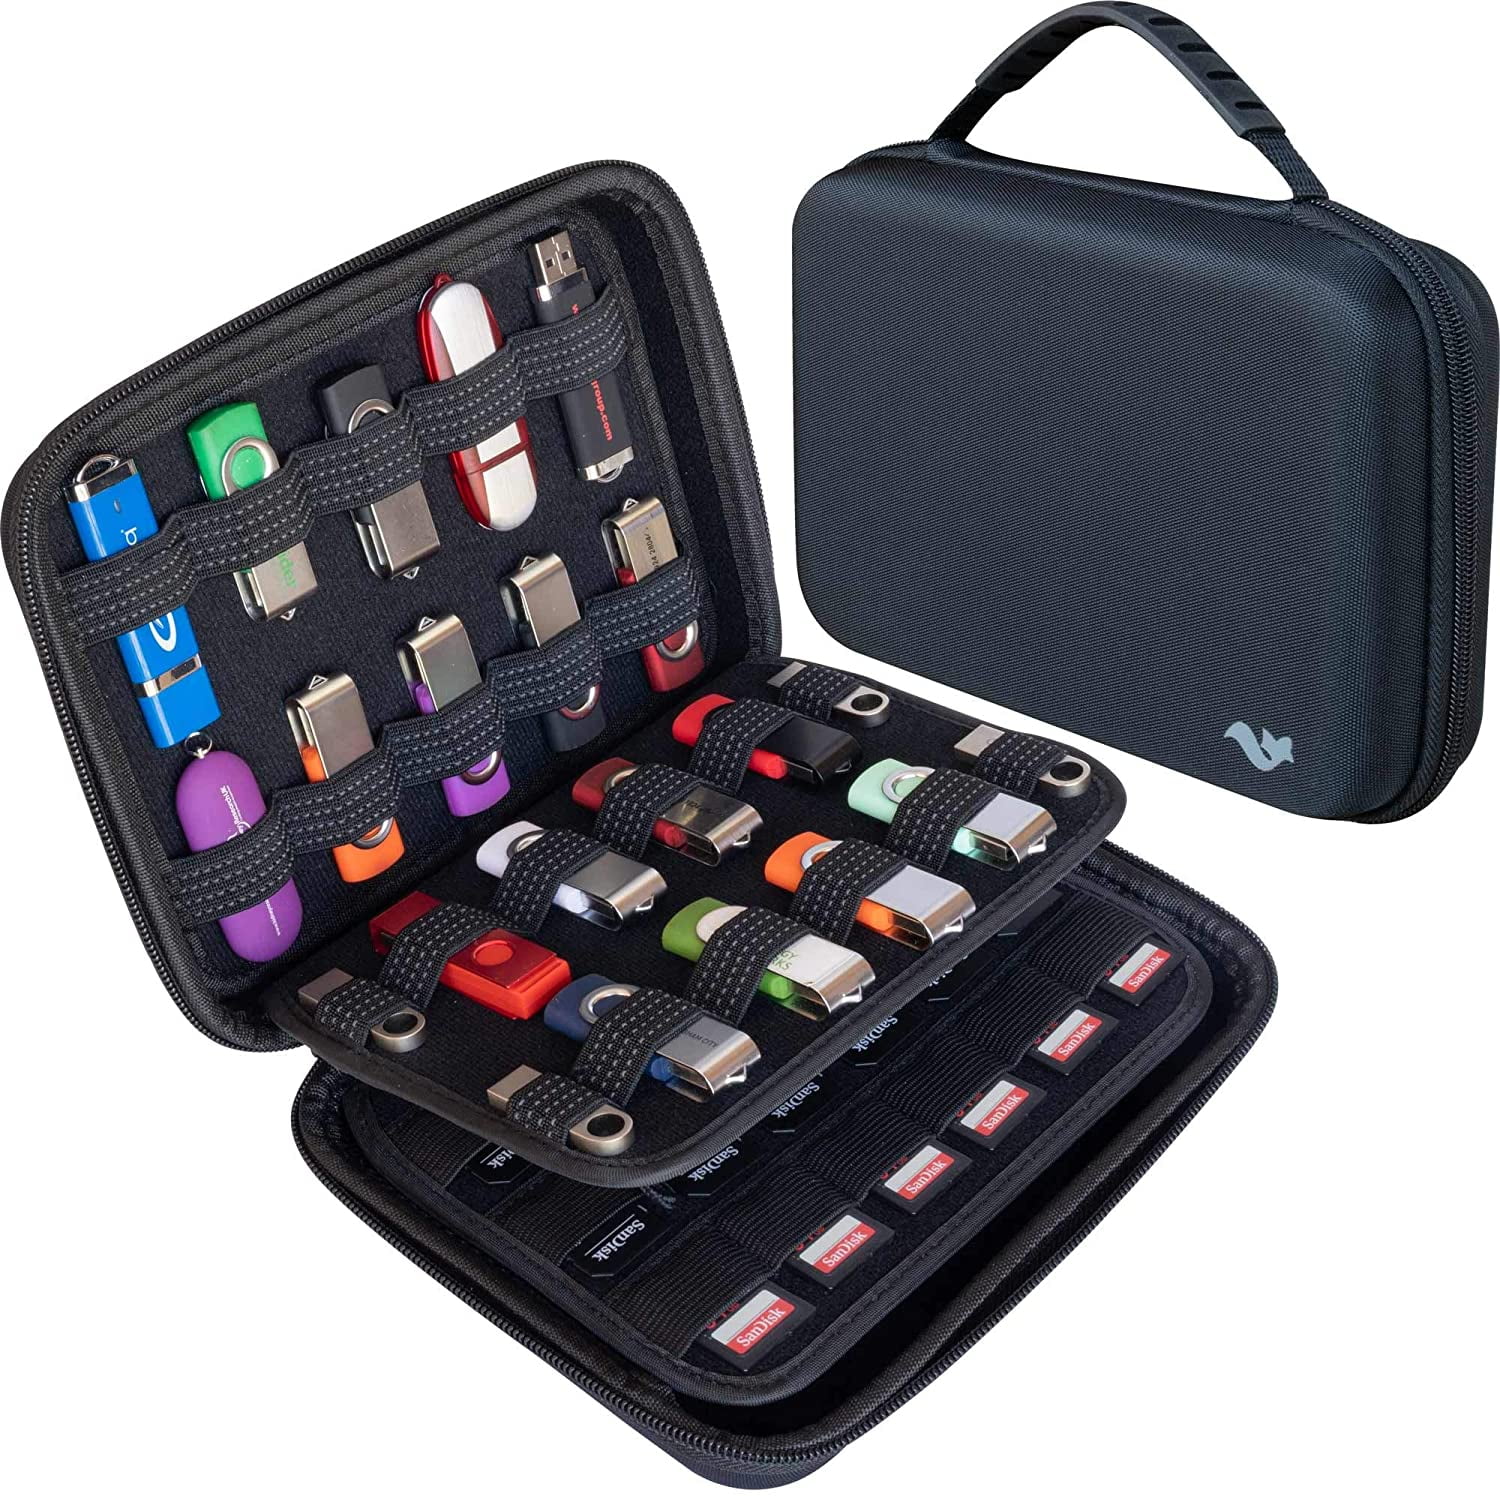 Portable Waterproof Electronic Accessories Bag for USB Flash Drives SD Cards,Earphone and Other Small Accessories 6.30 x 3.54 x 1.77 Inch,Black BUBM USB Flash Drive Case